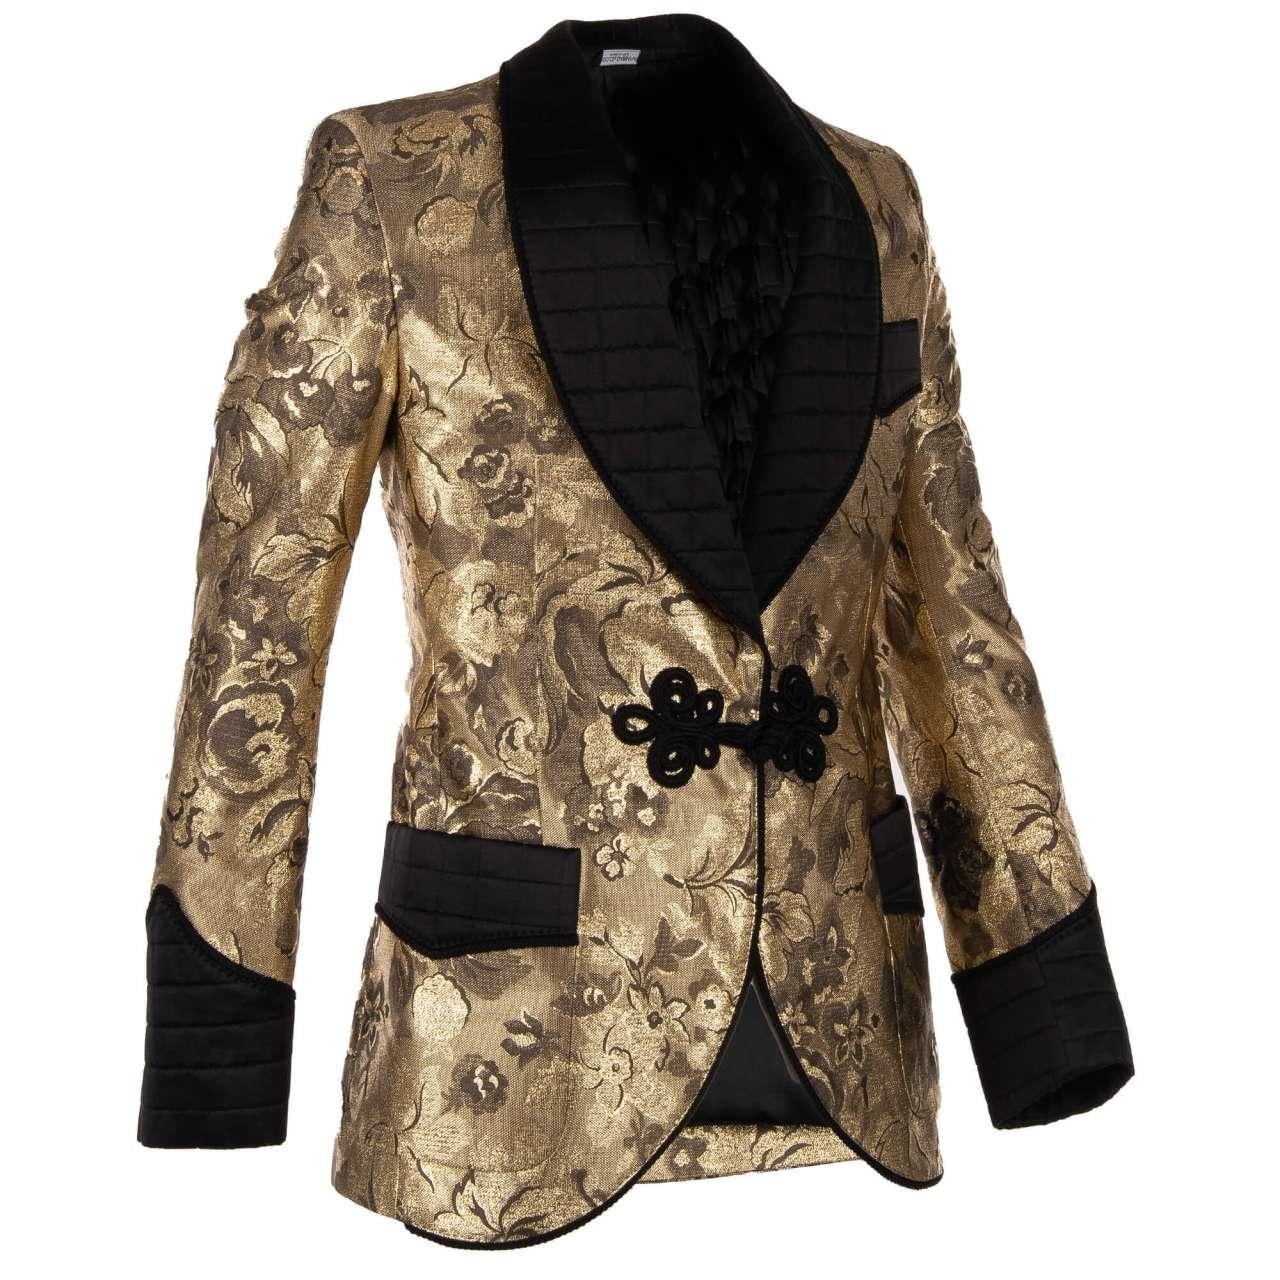 Dolce & Gabbana Baroque Floral Tuxedo Blazer with Rope Closure Black Gold 46 For Sale 2